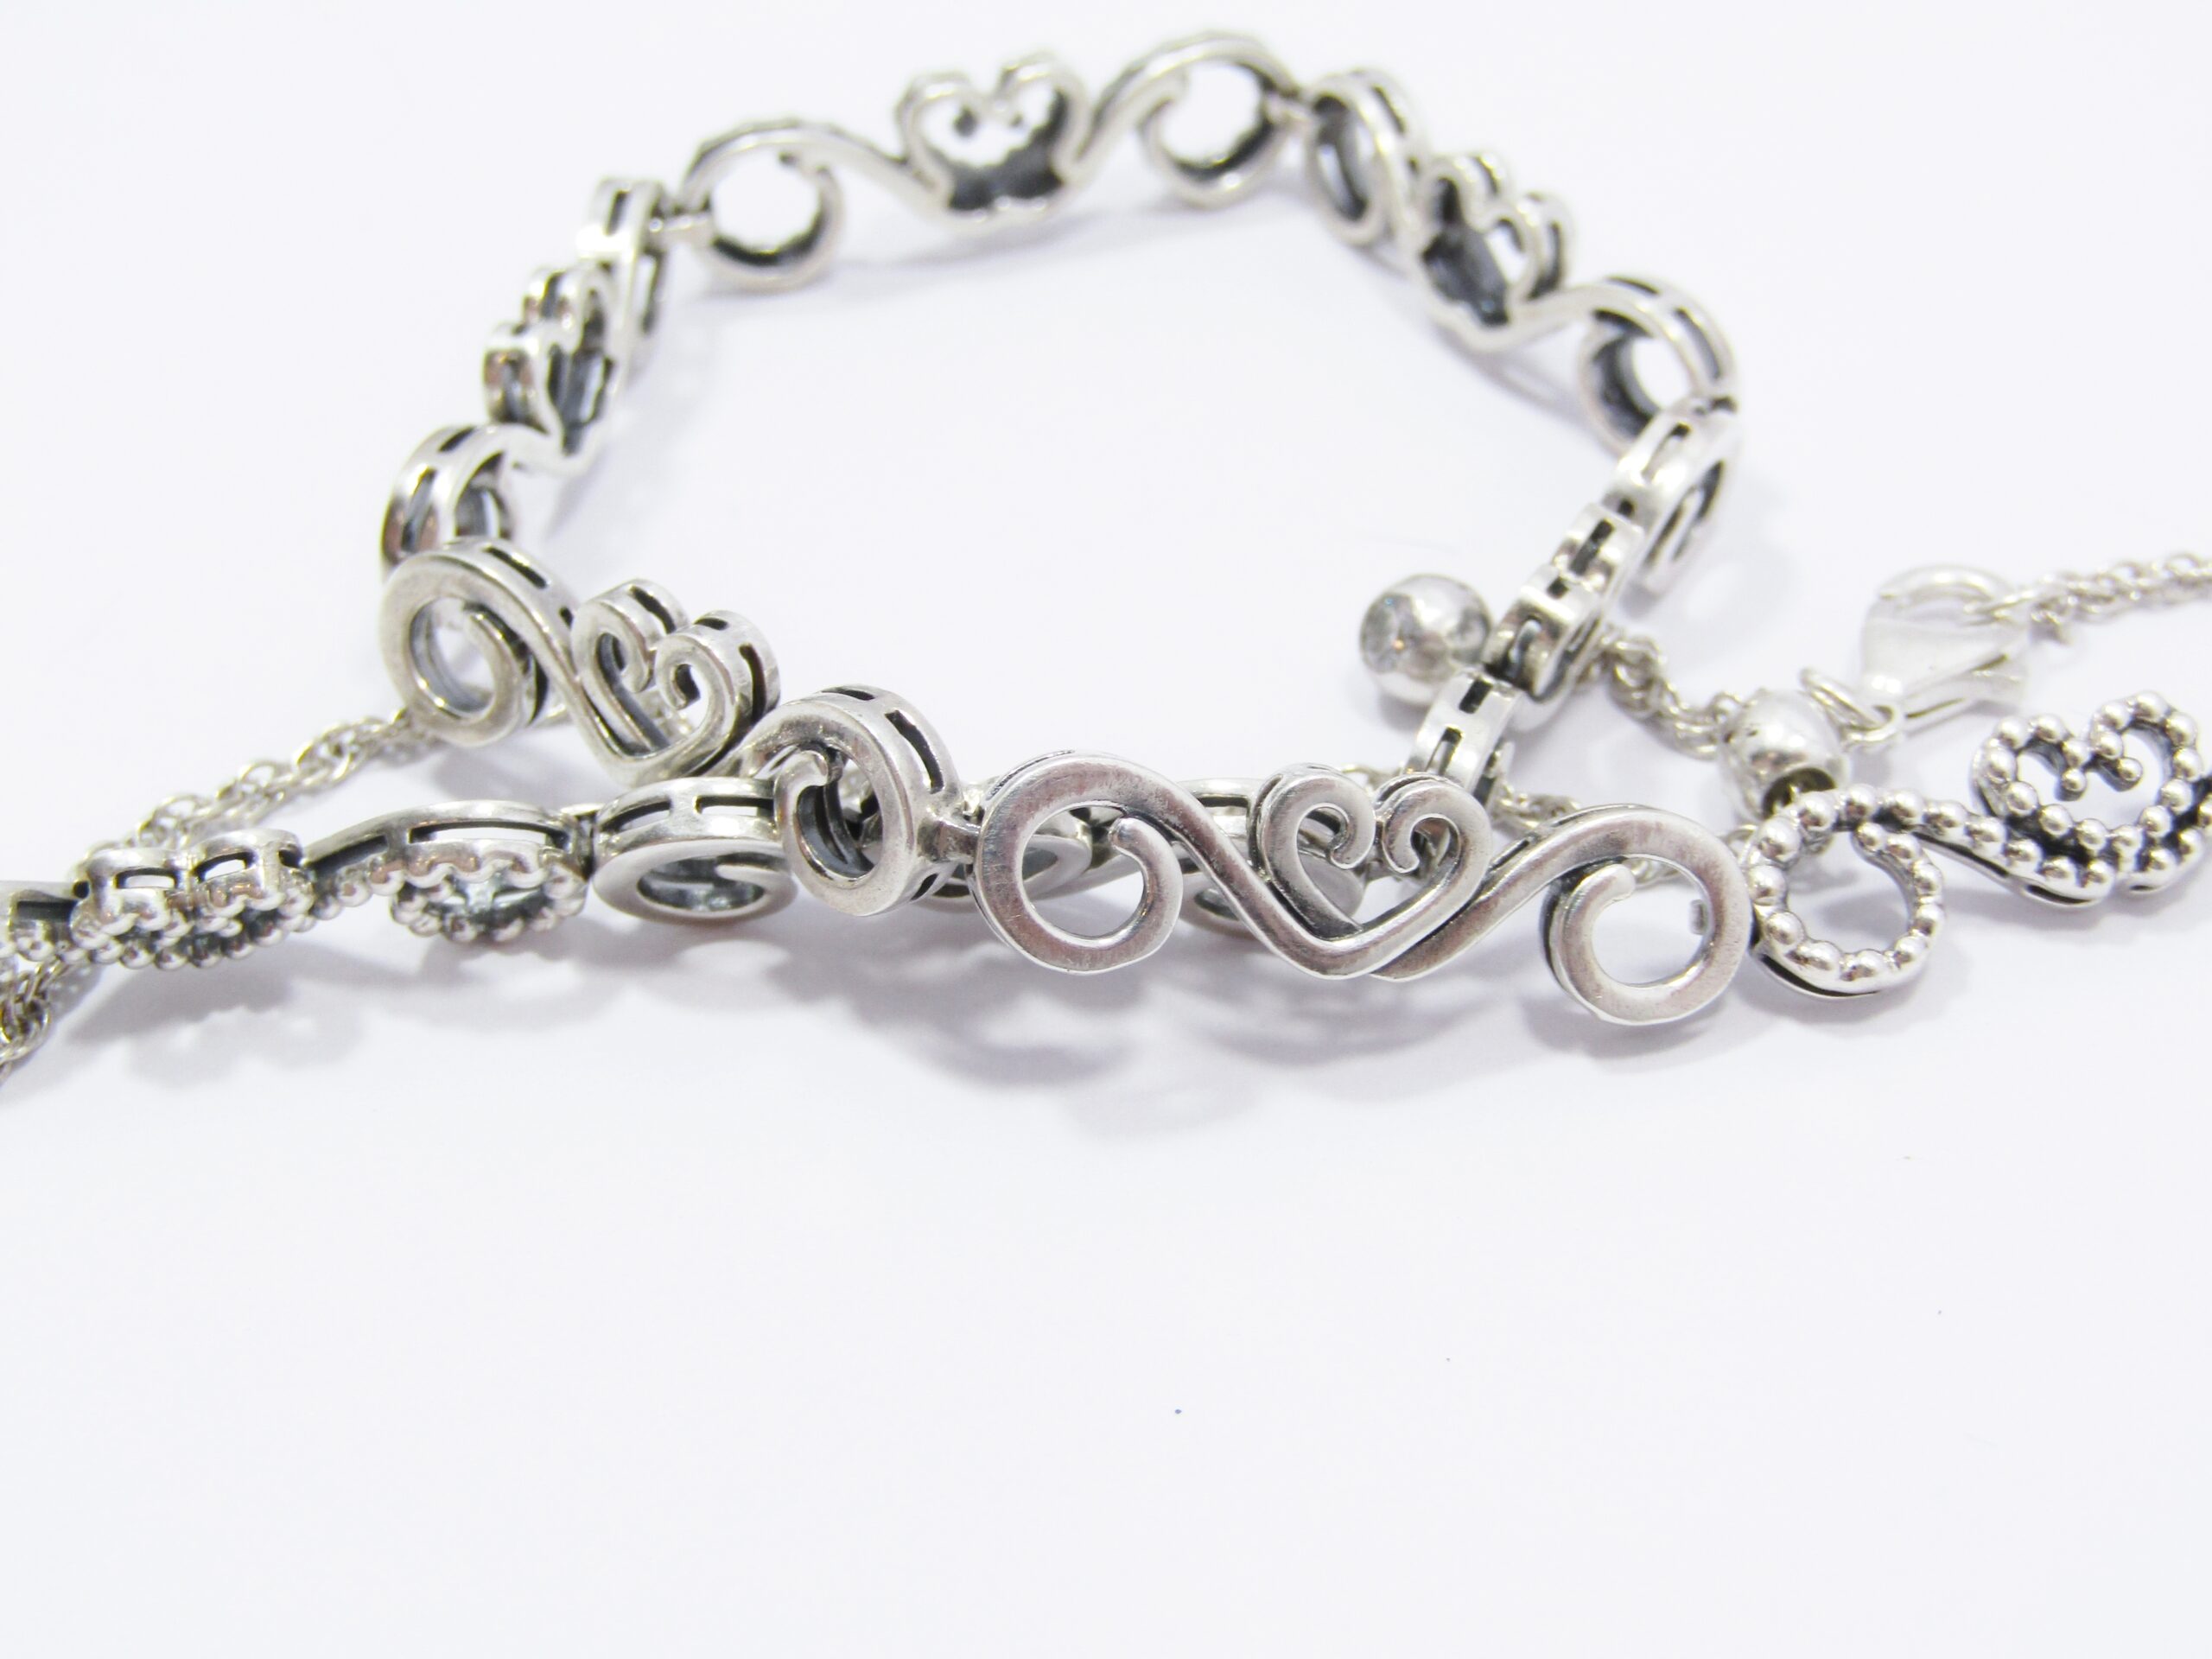 A Beautiful Vintage Scroll Design Pandora Necklace in Sterling Silve